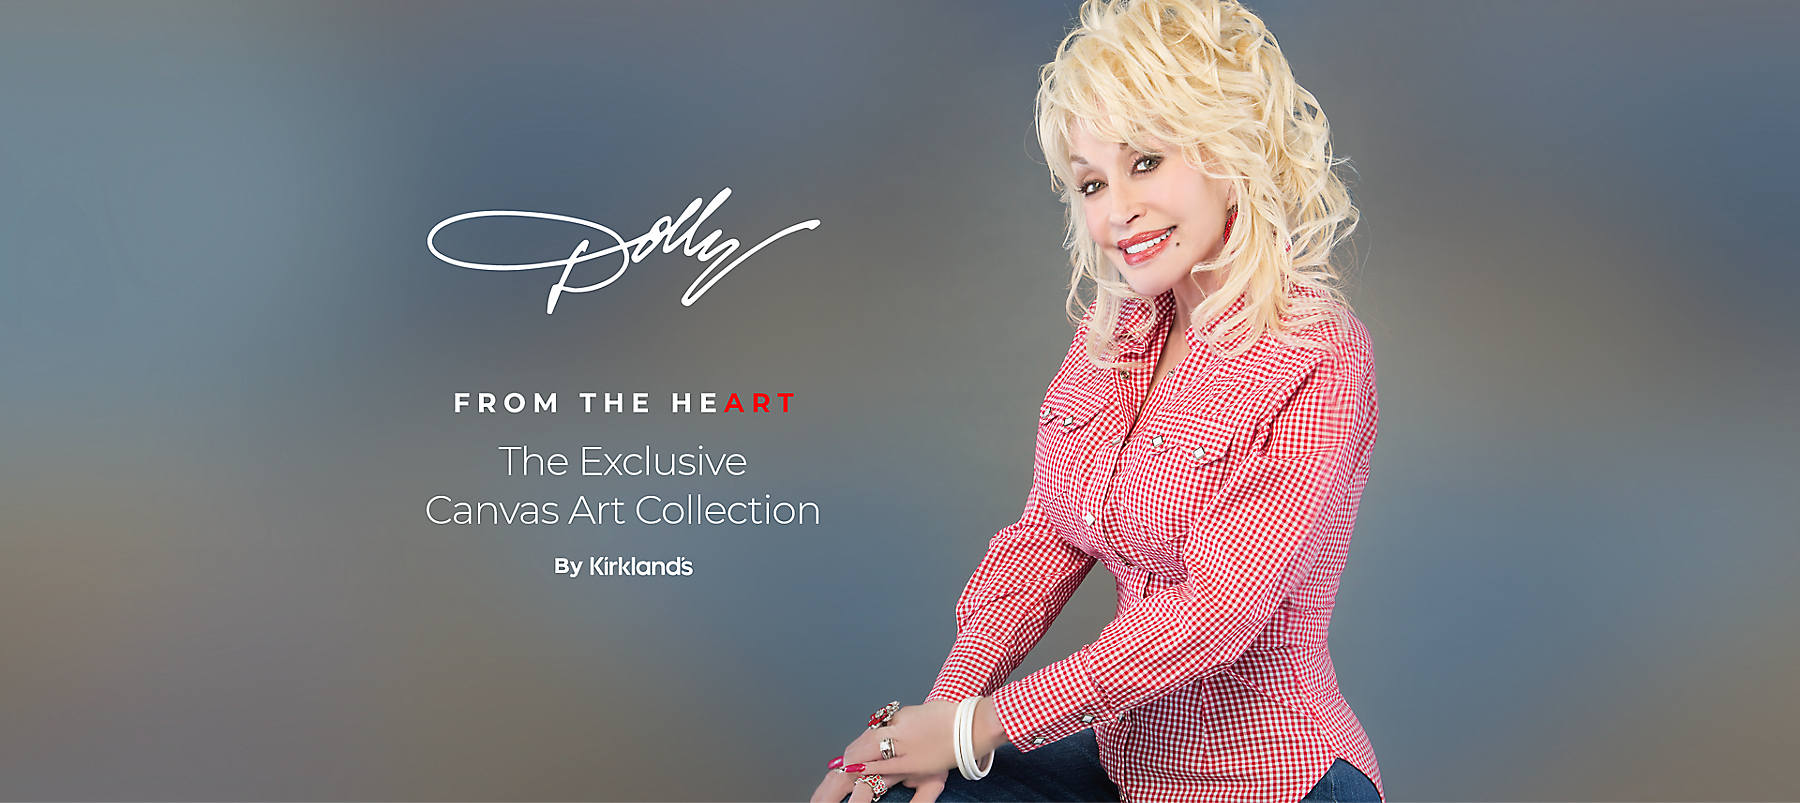 From the Art - The Exclusive Canvas Art Collection from Dolly